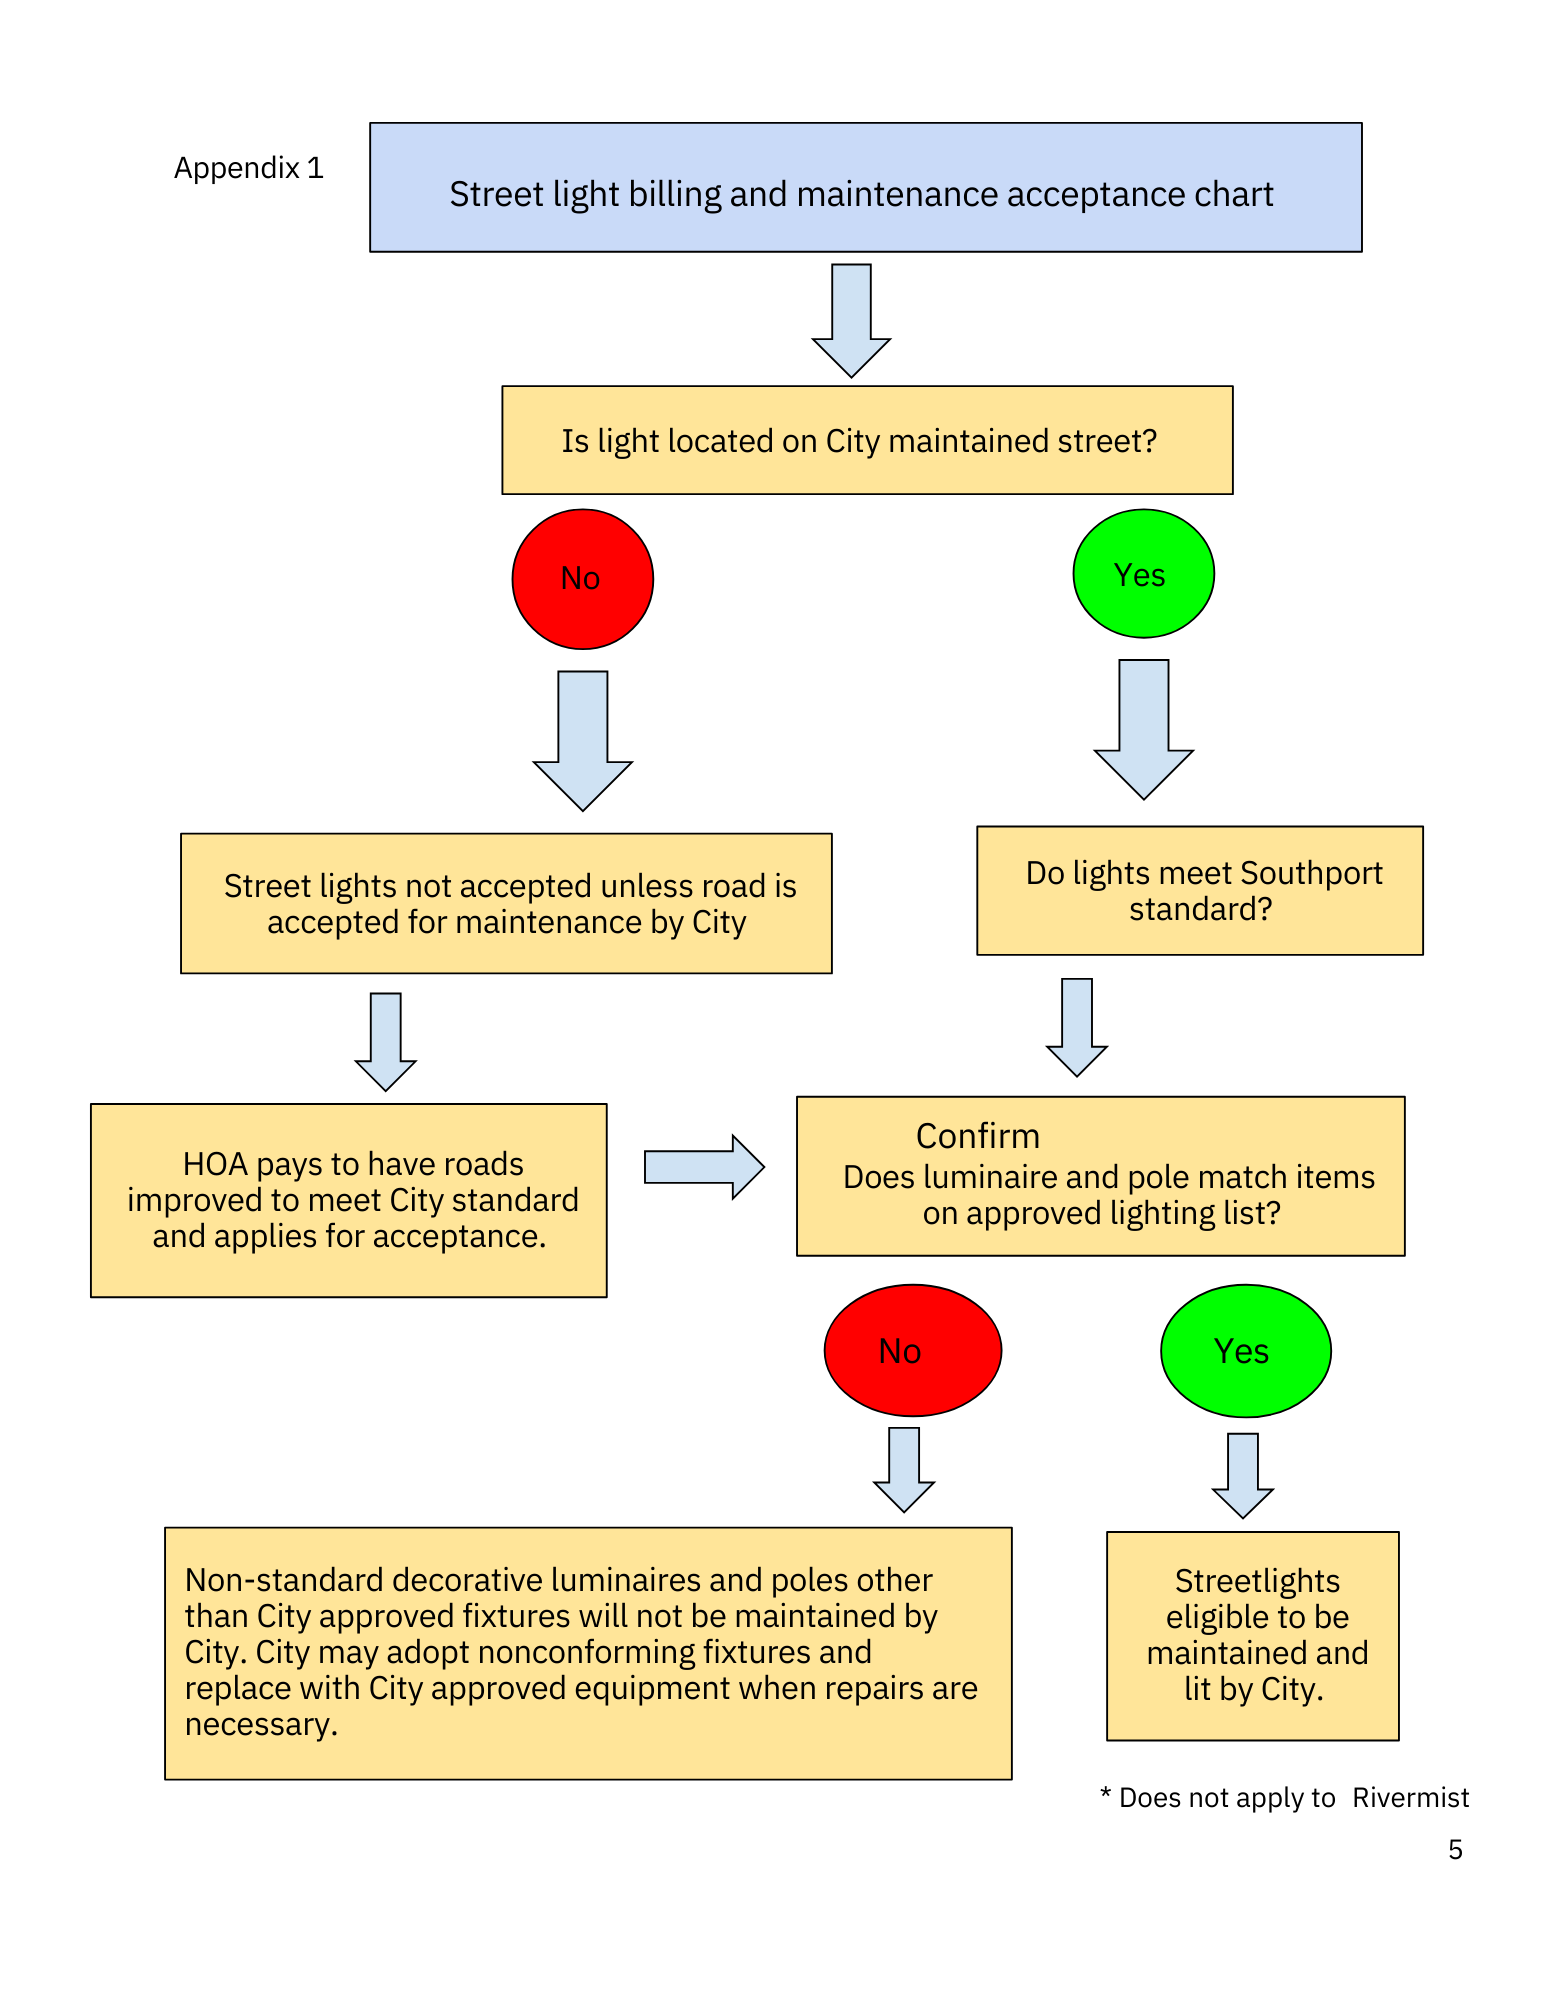 Flow chart describing what does or does not conform to the Street Light Policy.